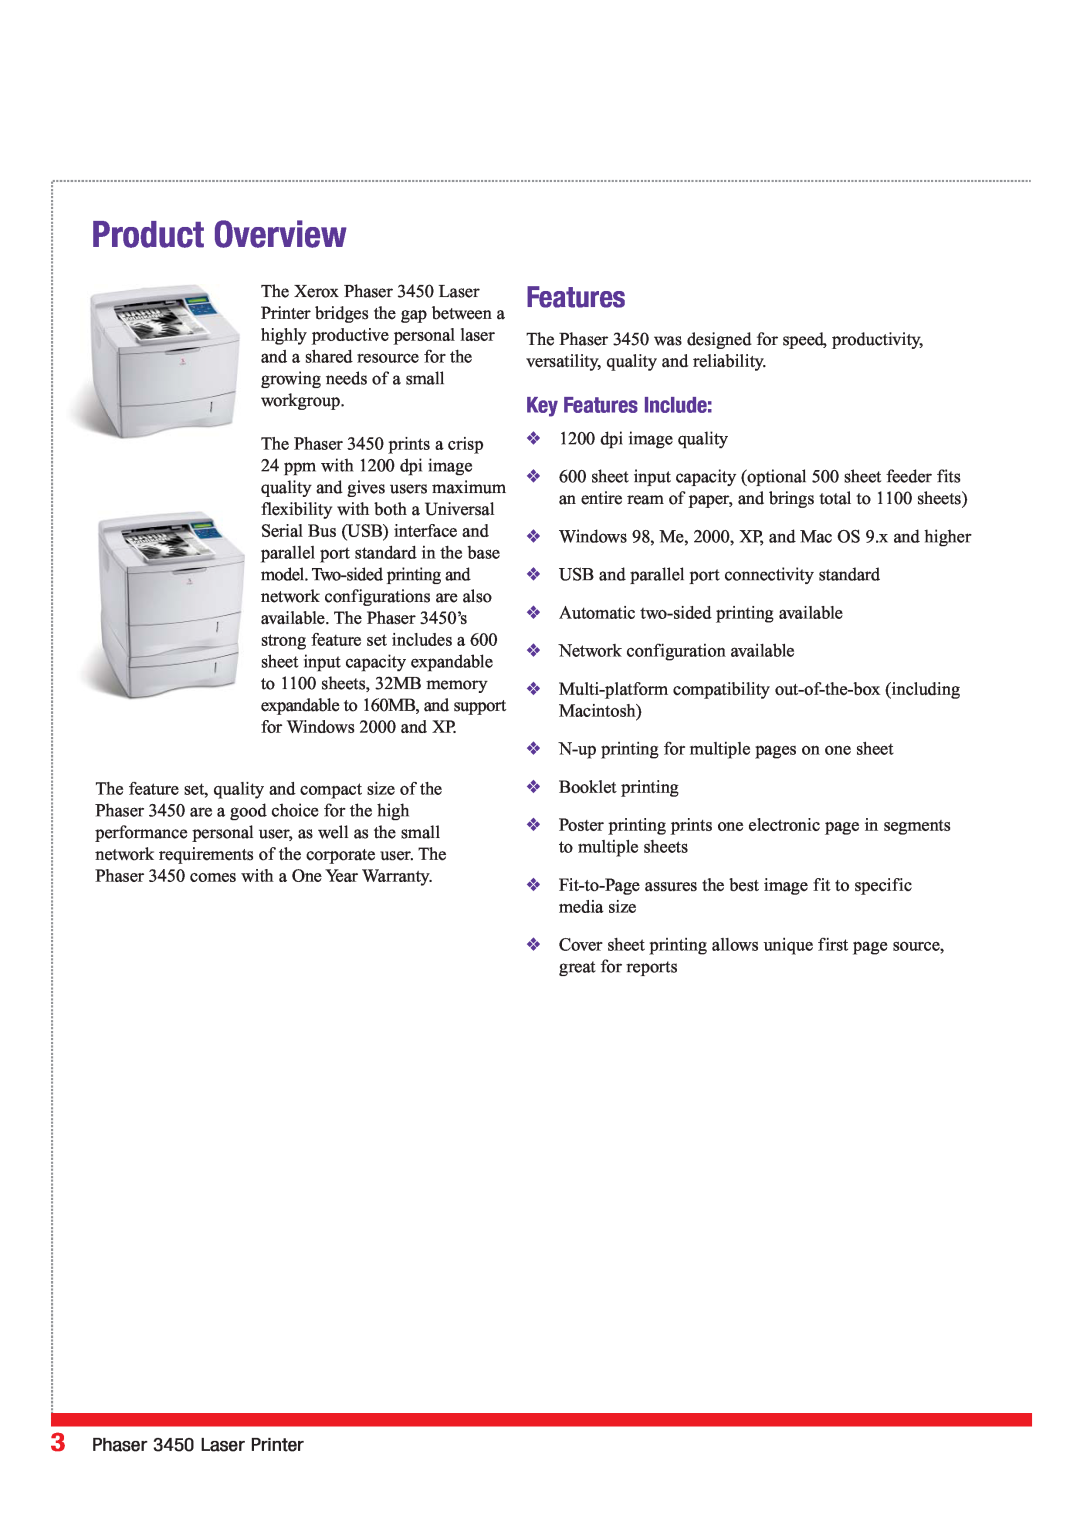 Xerox manual Product Overview, Key Features Include, Phaser 3450 Laser Printer 